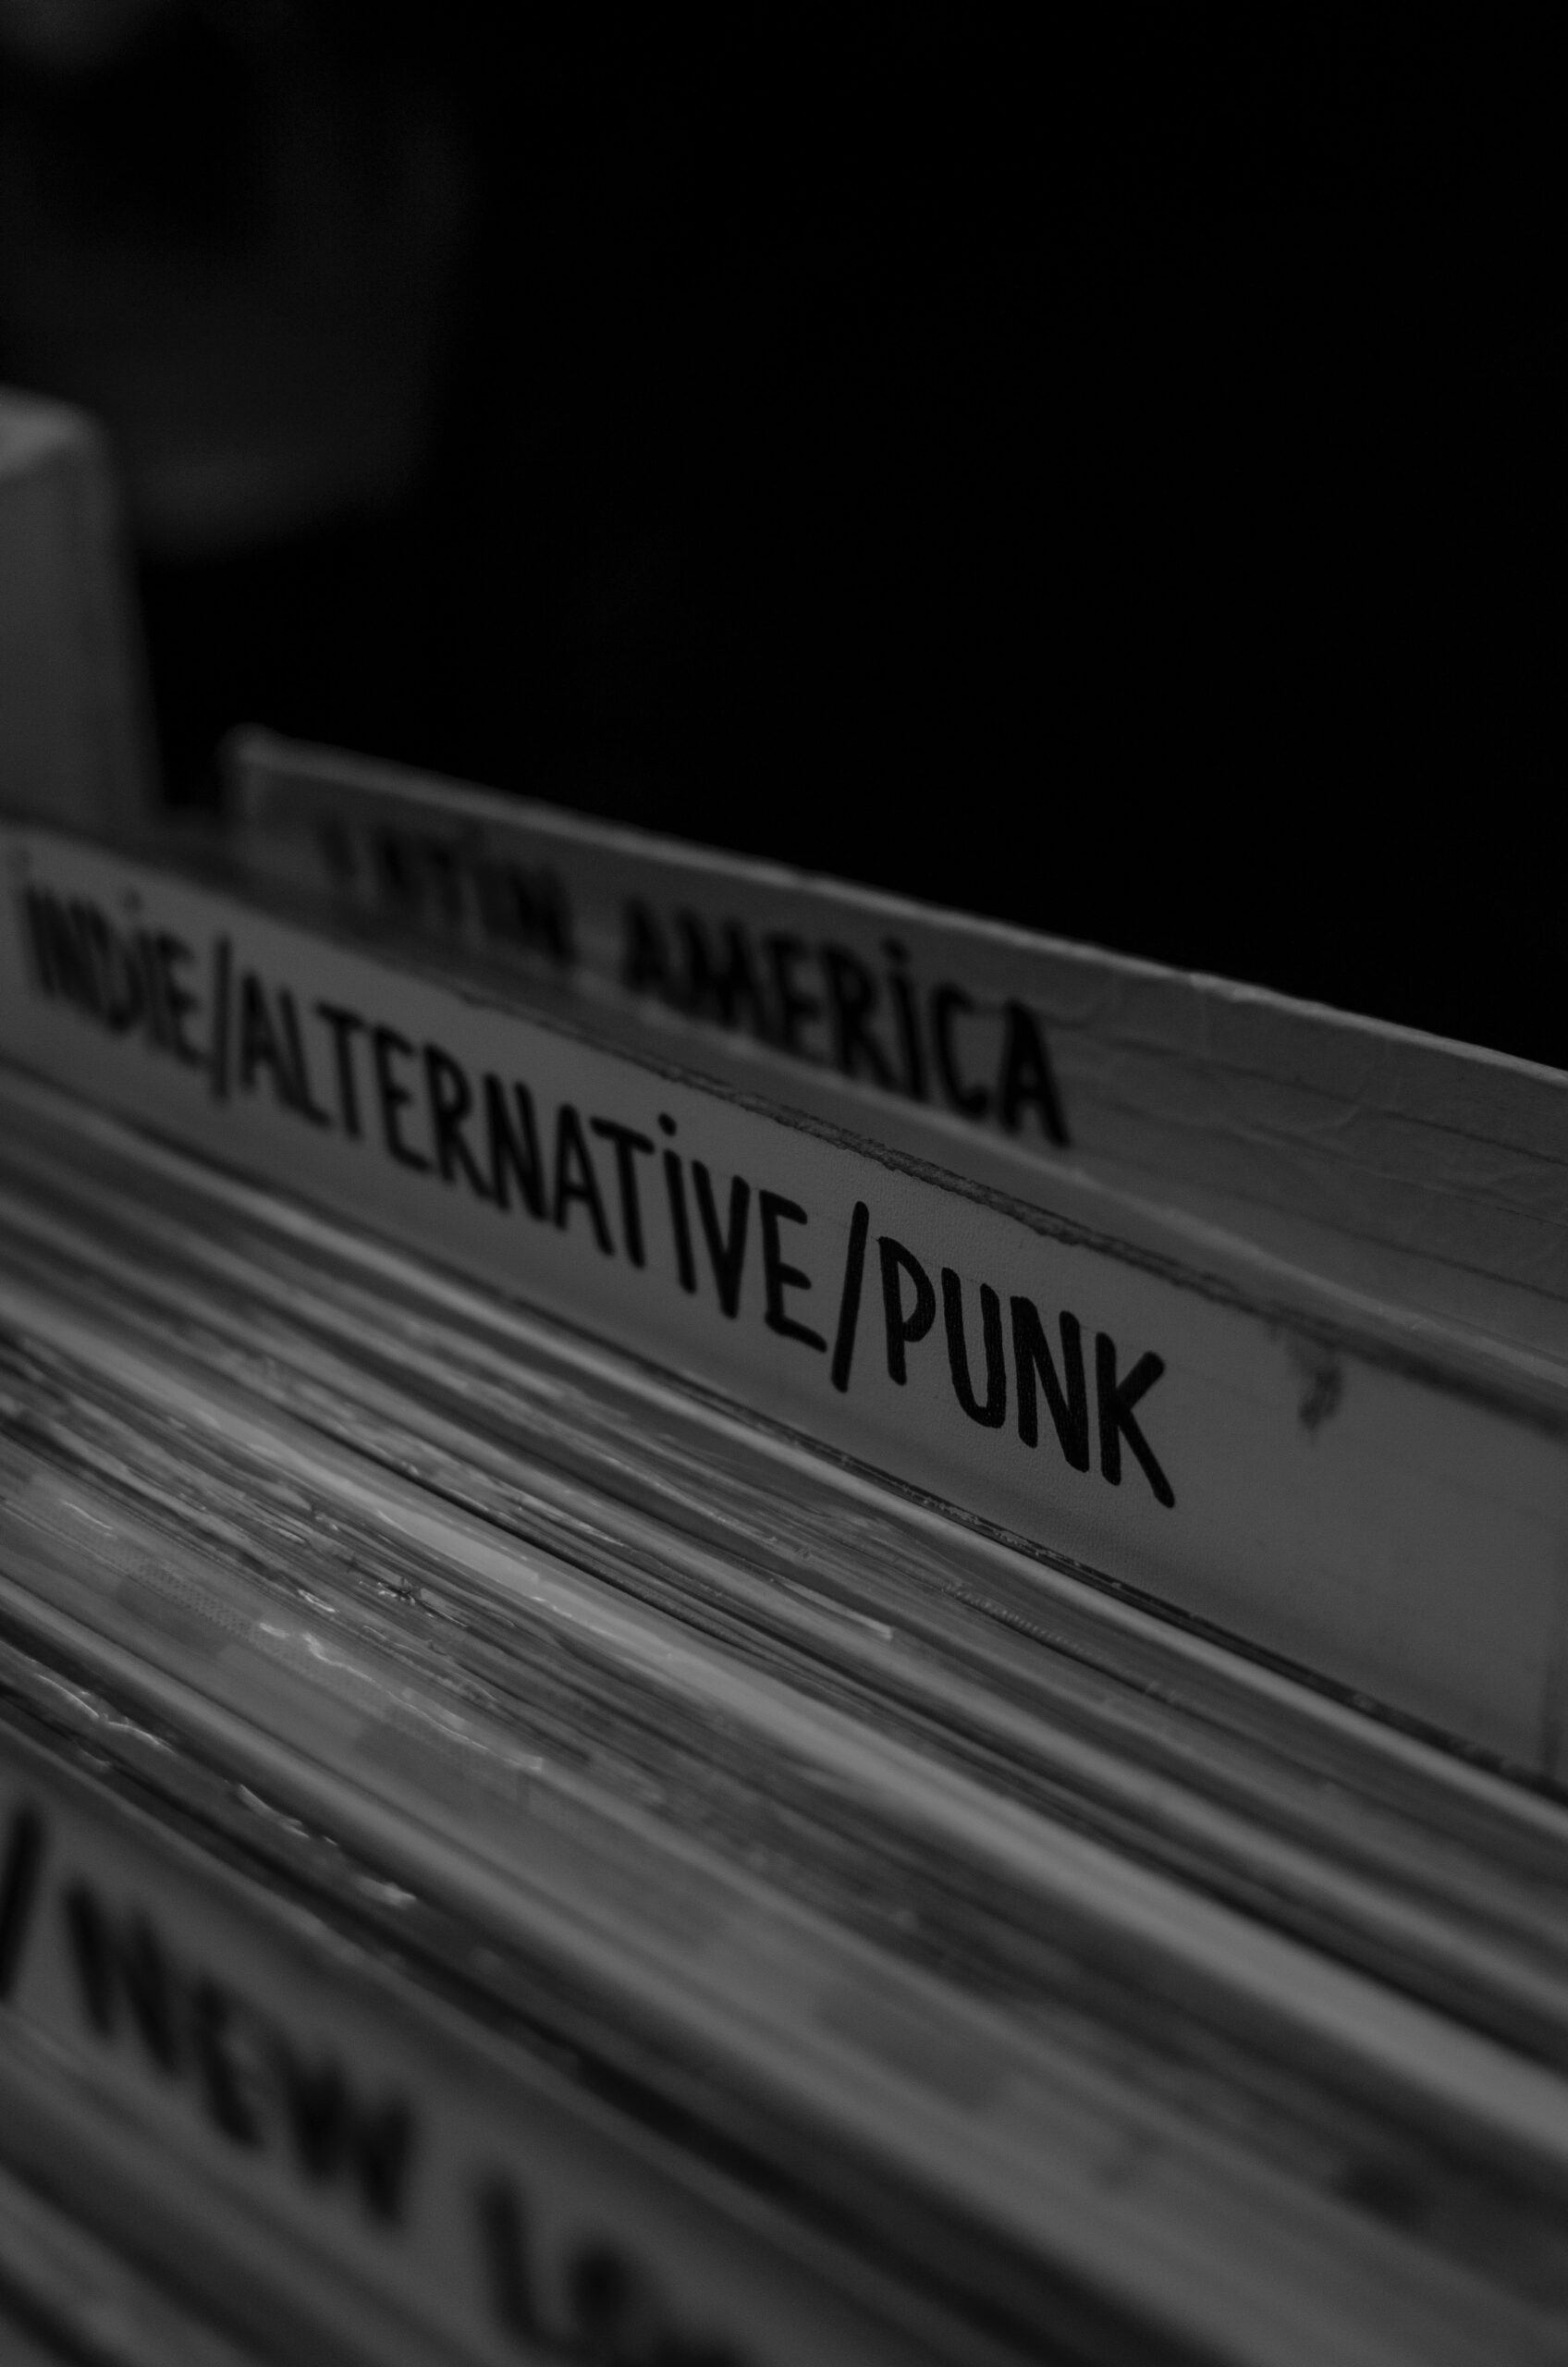 What's the difference between punk and grunge?